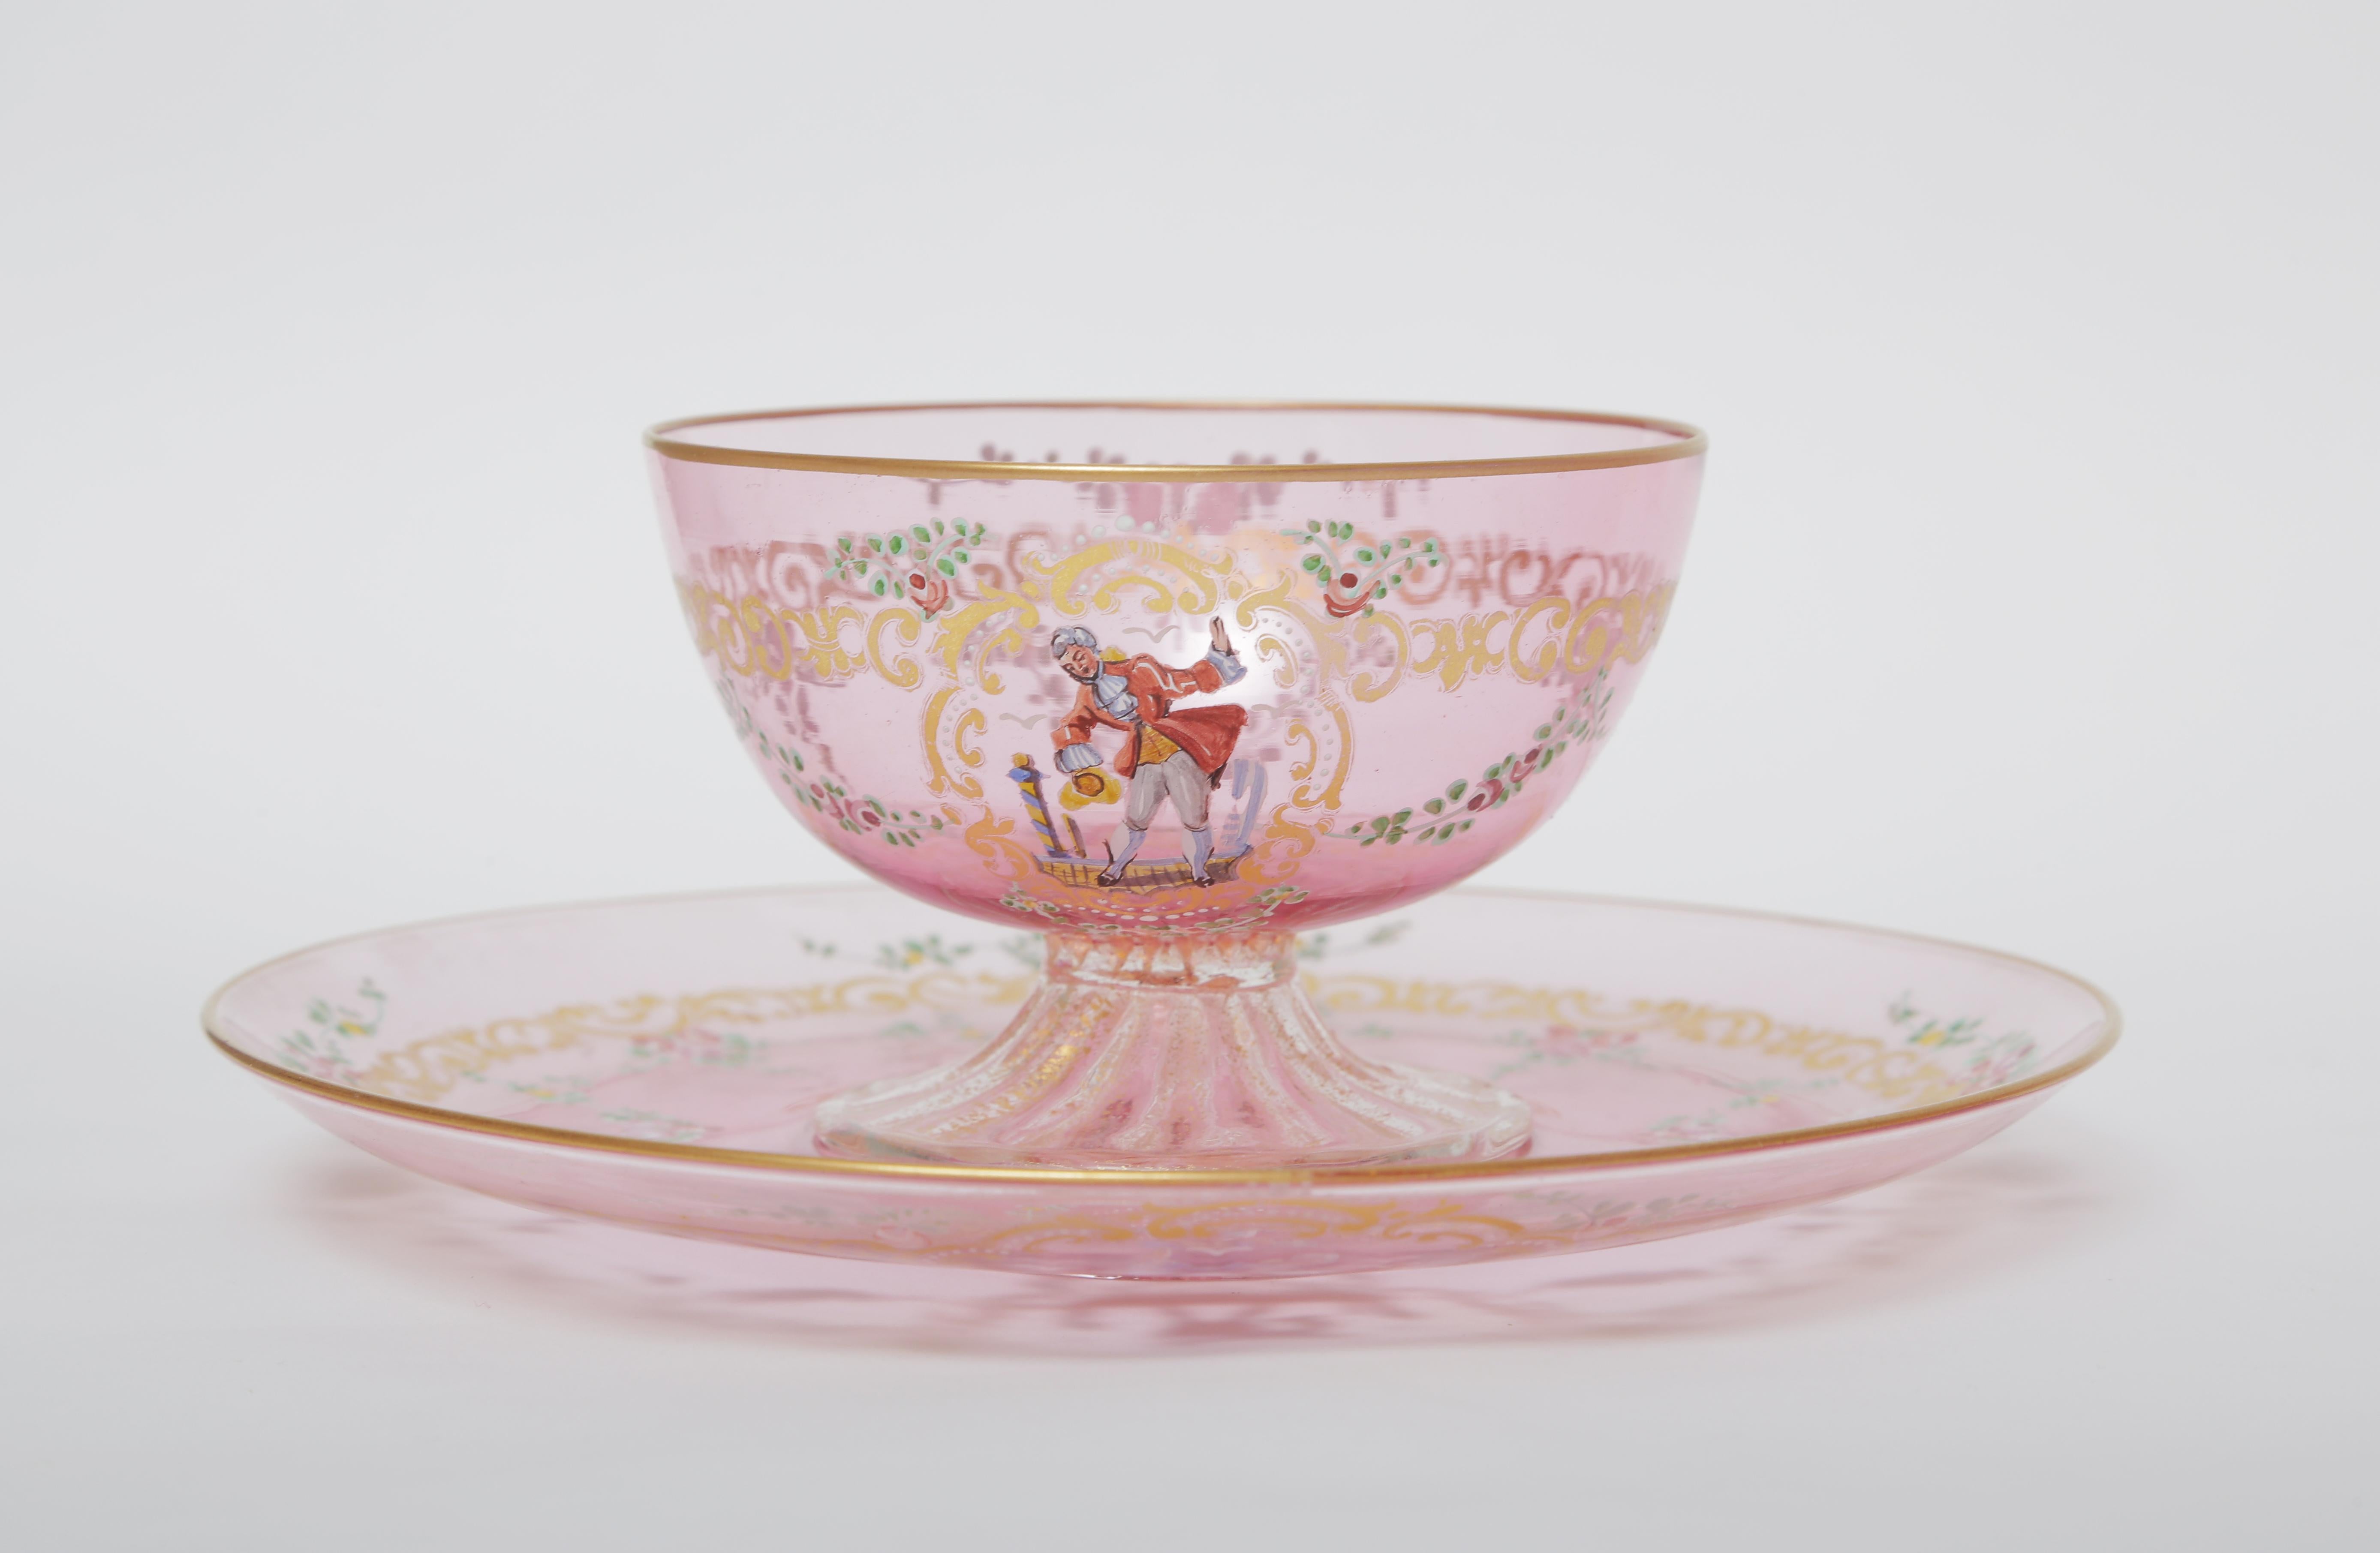 Early 20th Century 22 Pieces Antique Venetian Glass Dessert Coupes and Plates, Pink, circa 1900